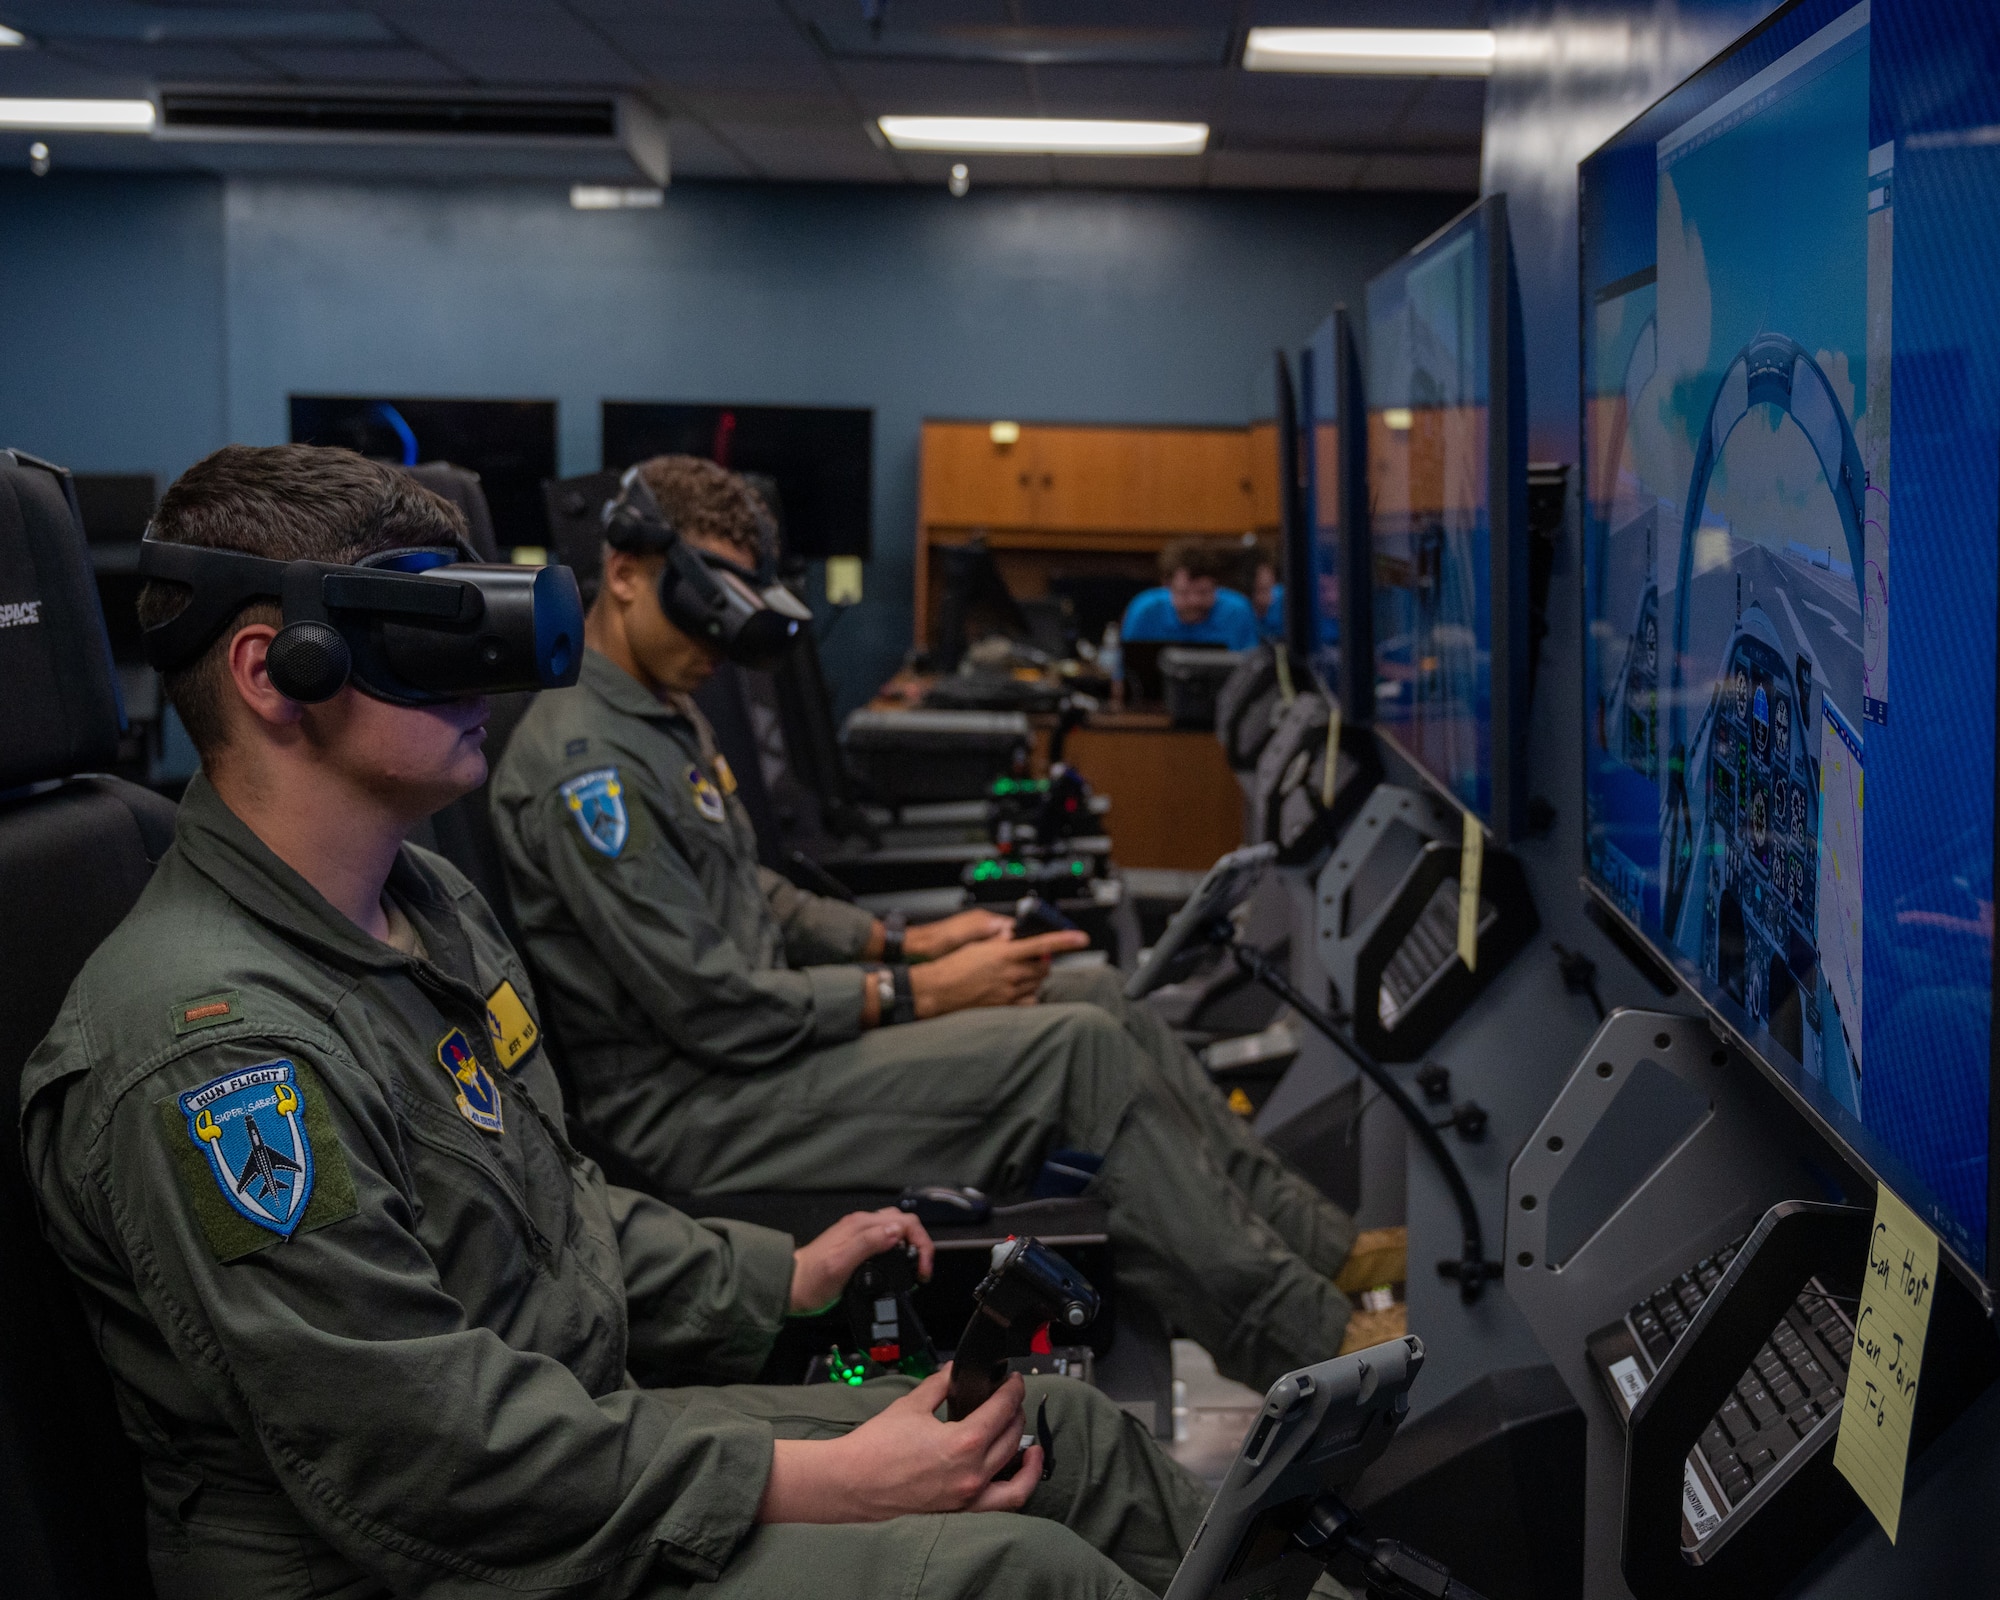 U.S. Air Force 2nd Lt. Christian Lobiondo (left) and Capt. Roderick Walker (right), 47th Student Squadron student pilots, fly together in virtual reality at Laughlin Air Force Base, Texas, July 20, 2023. Student pilots are able to practice maneuvers in VR with other students, allowing formation flights can communications practice. (U.S. Air Force photo by Senior Airman Nicholas Larsen)